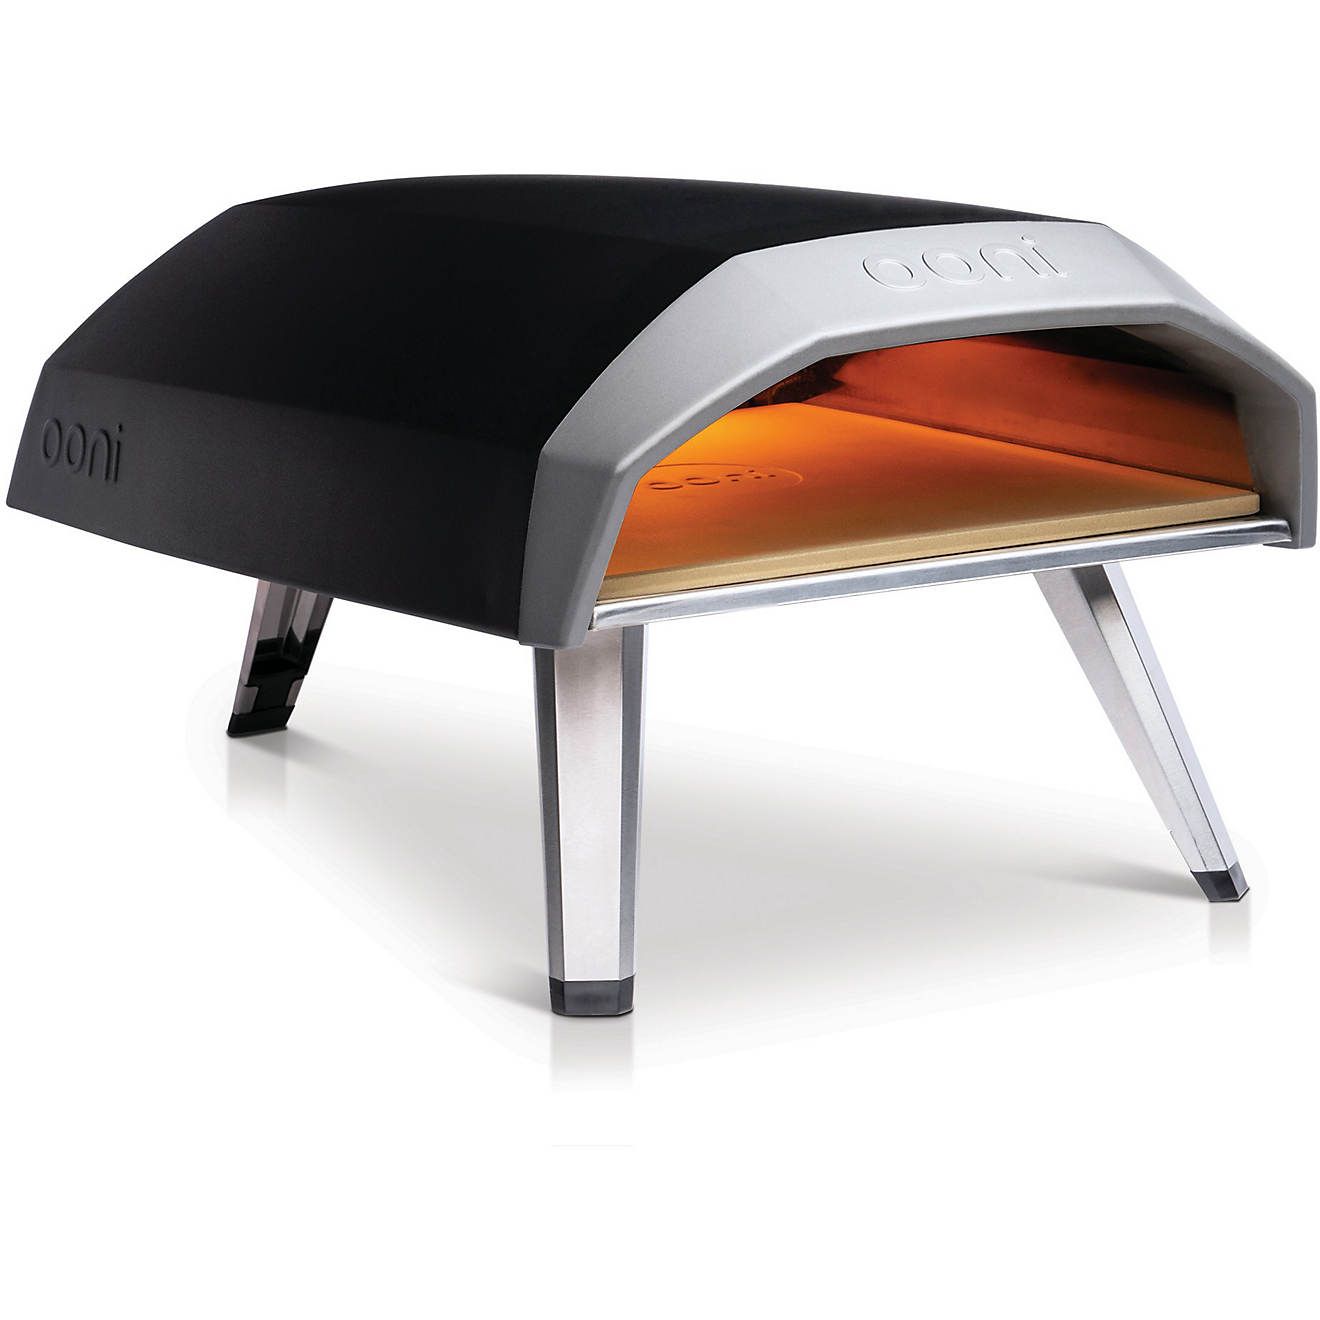 Ooni Koda Gas-Fired Portable Pizza Oven | Academy | Academy Sports + Outdoors